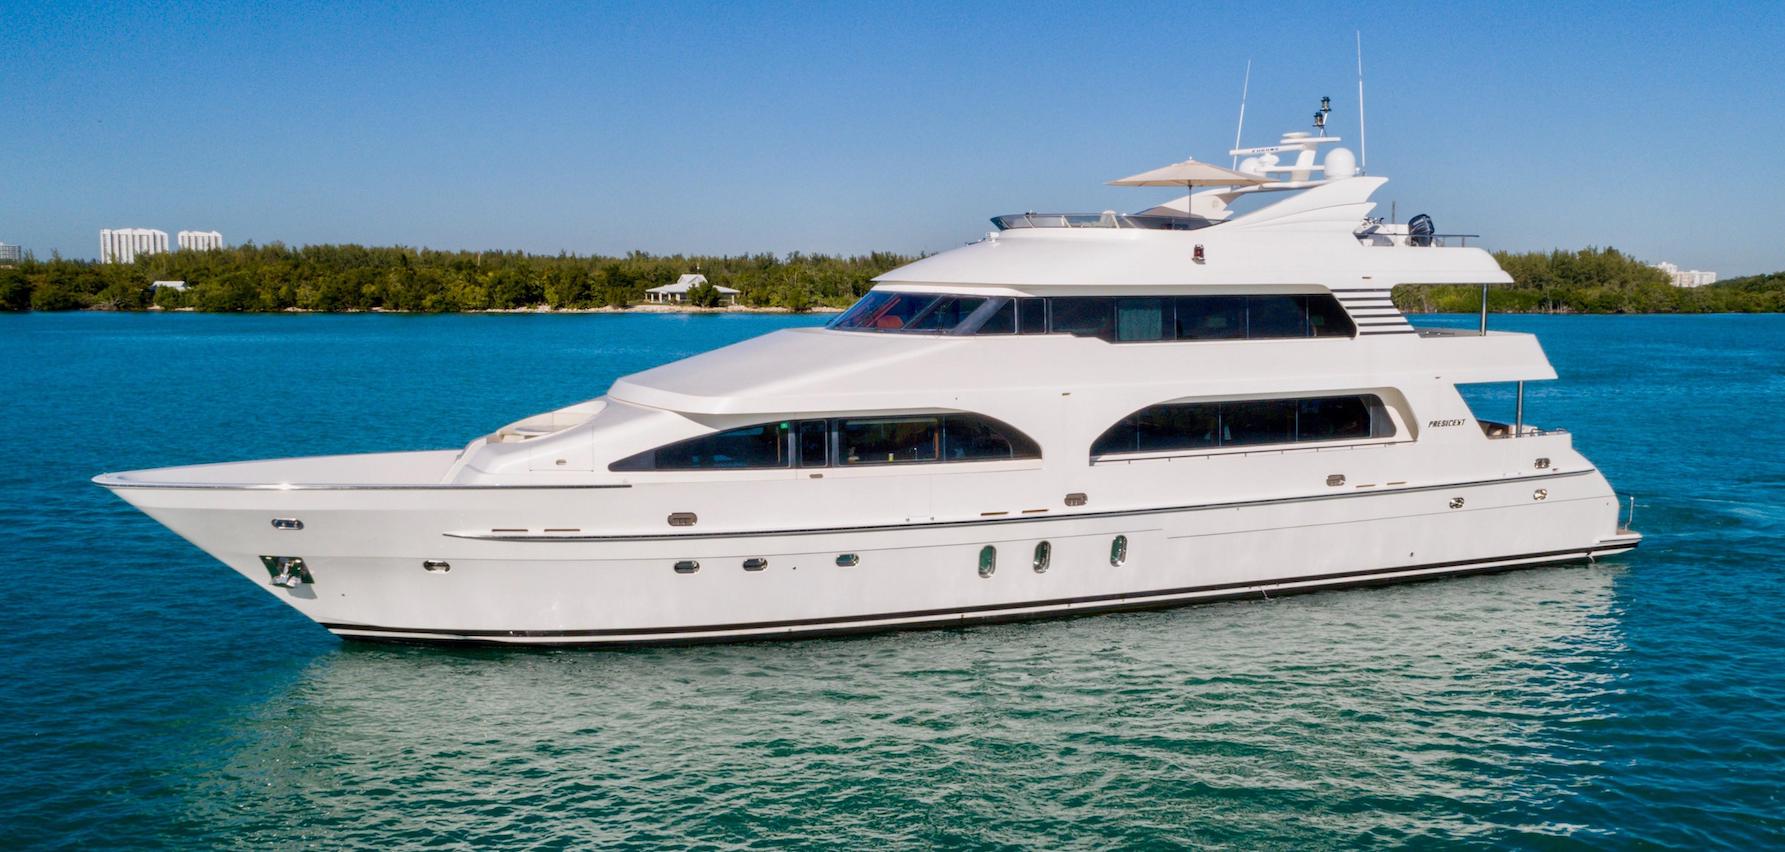 meaning of presidential yachts